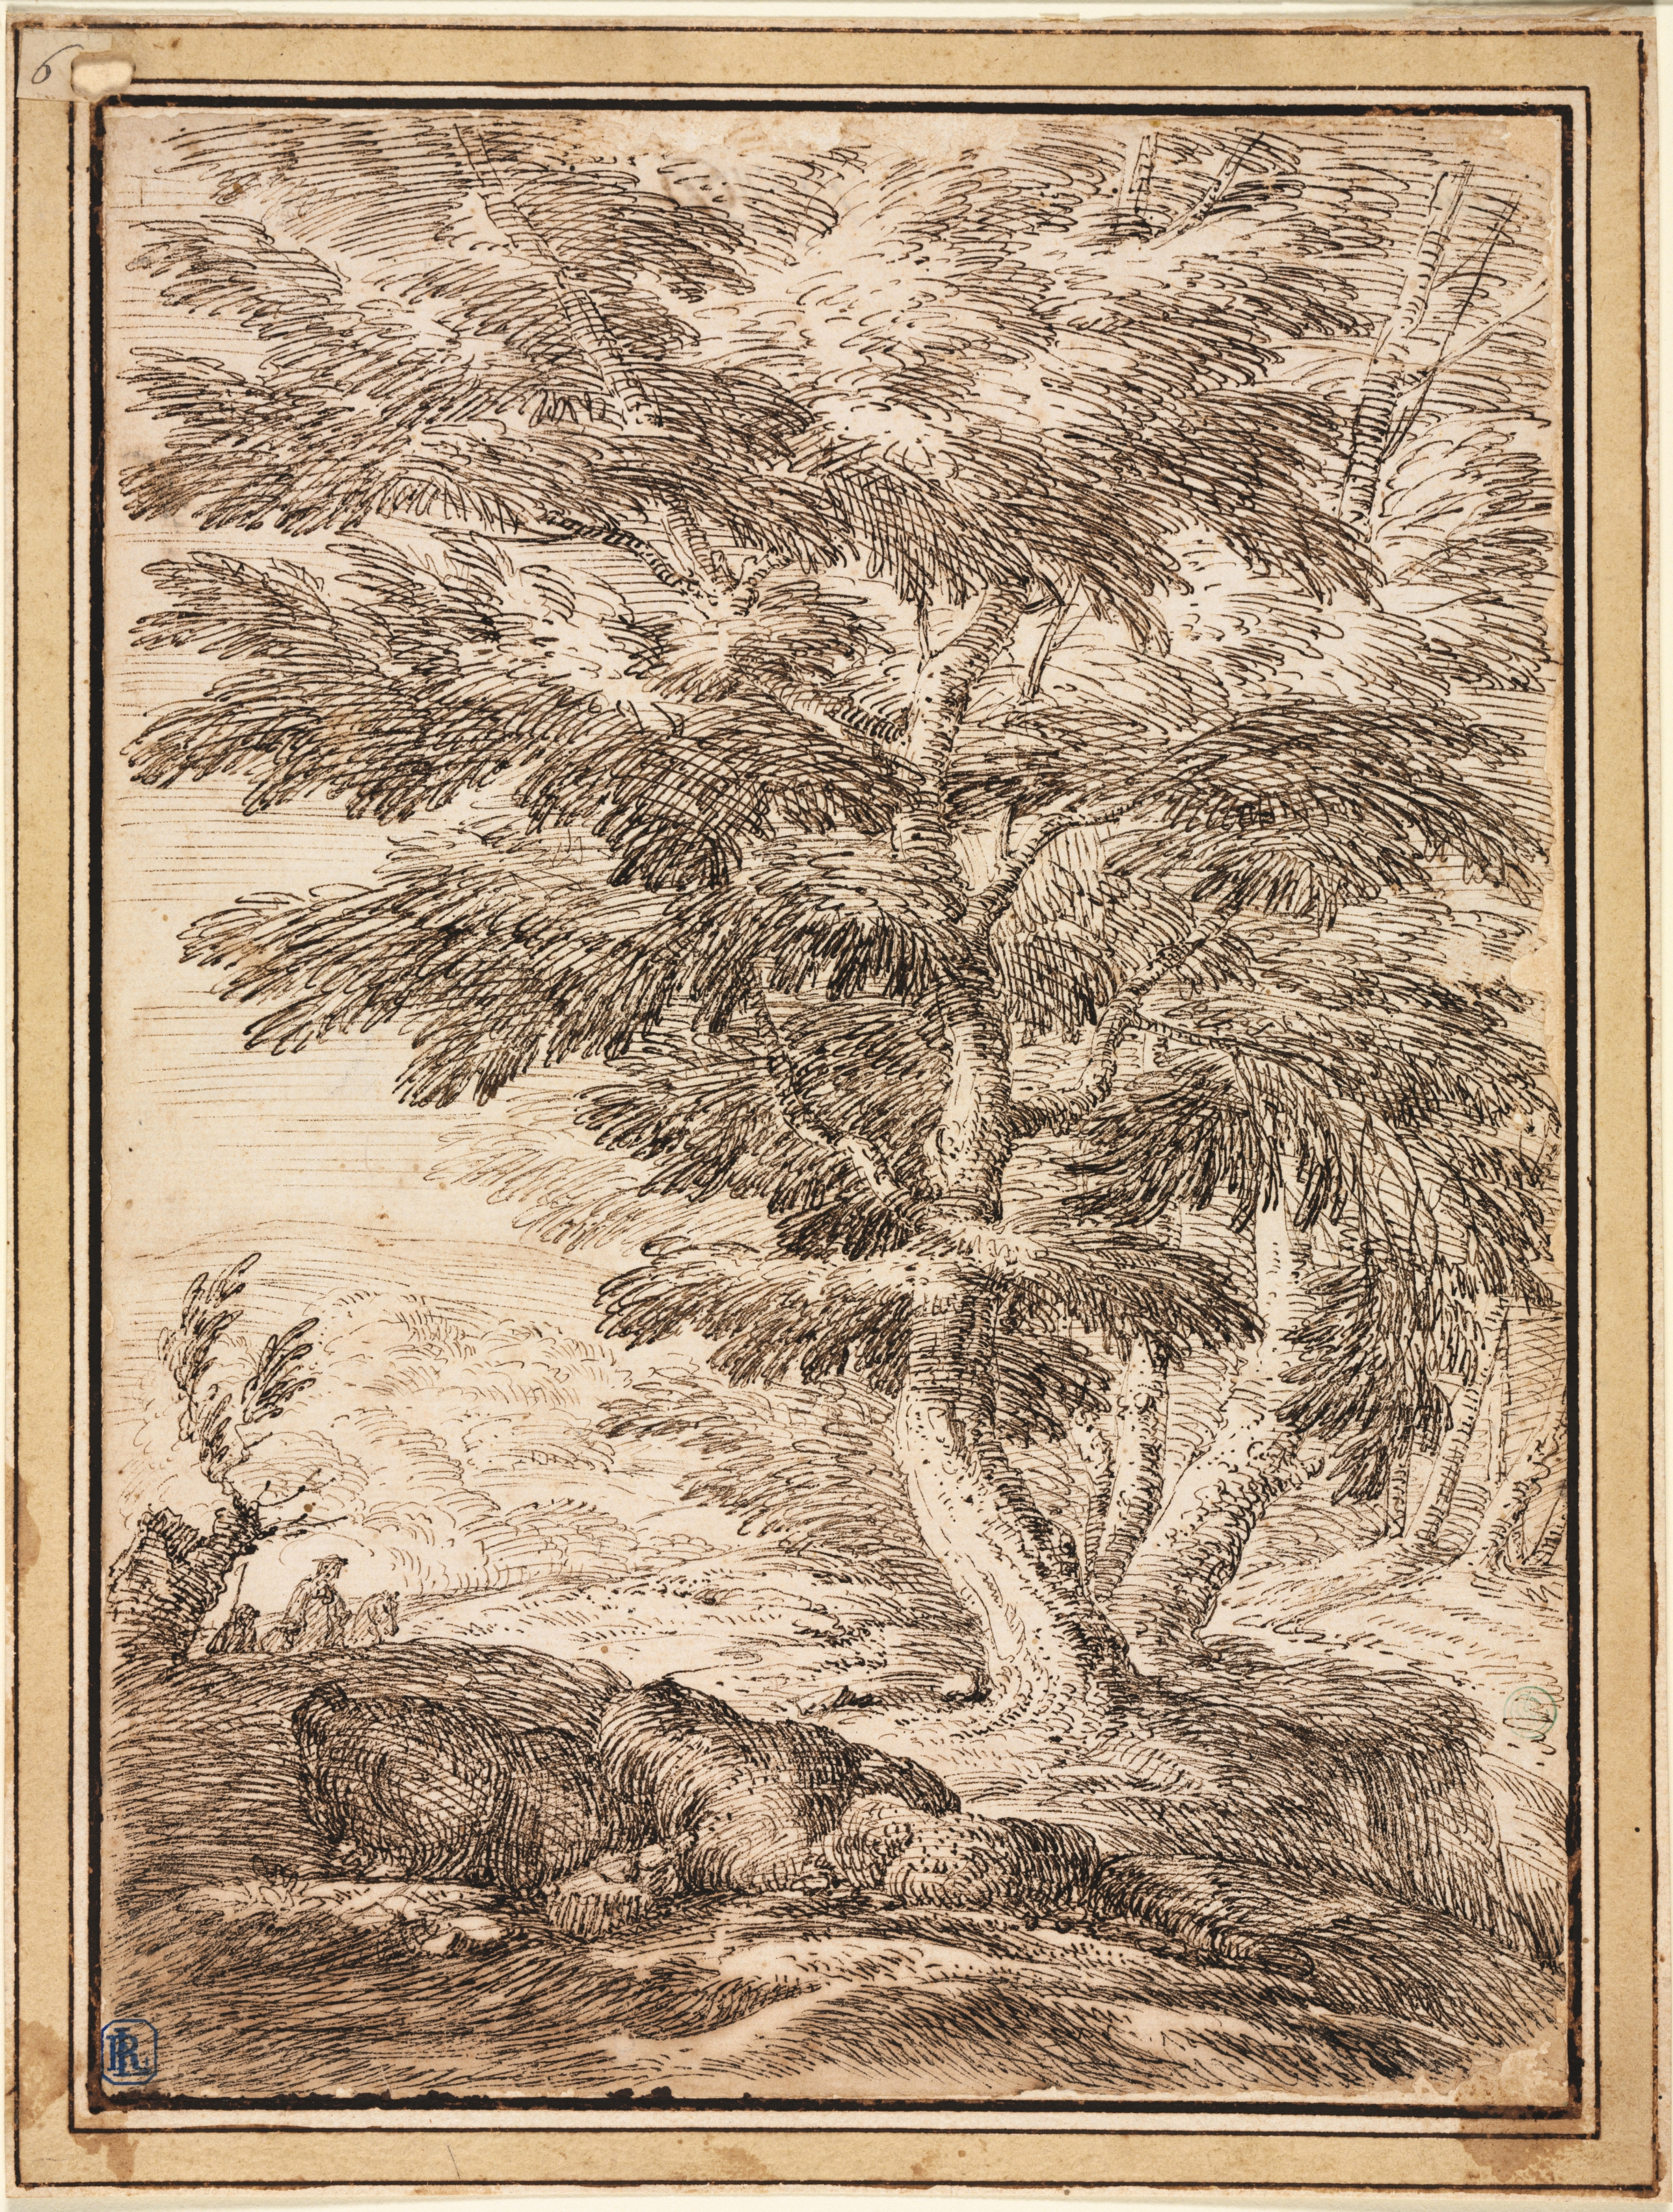 Landscape with Clump of Trees